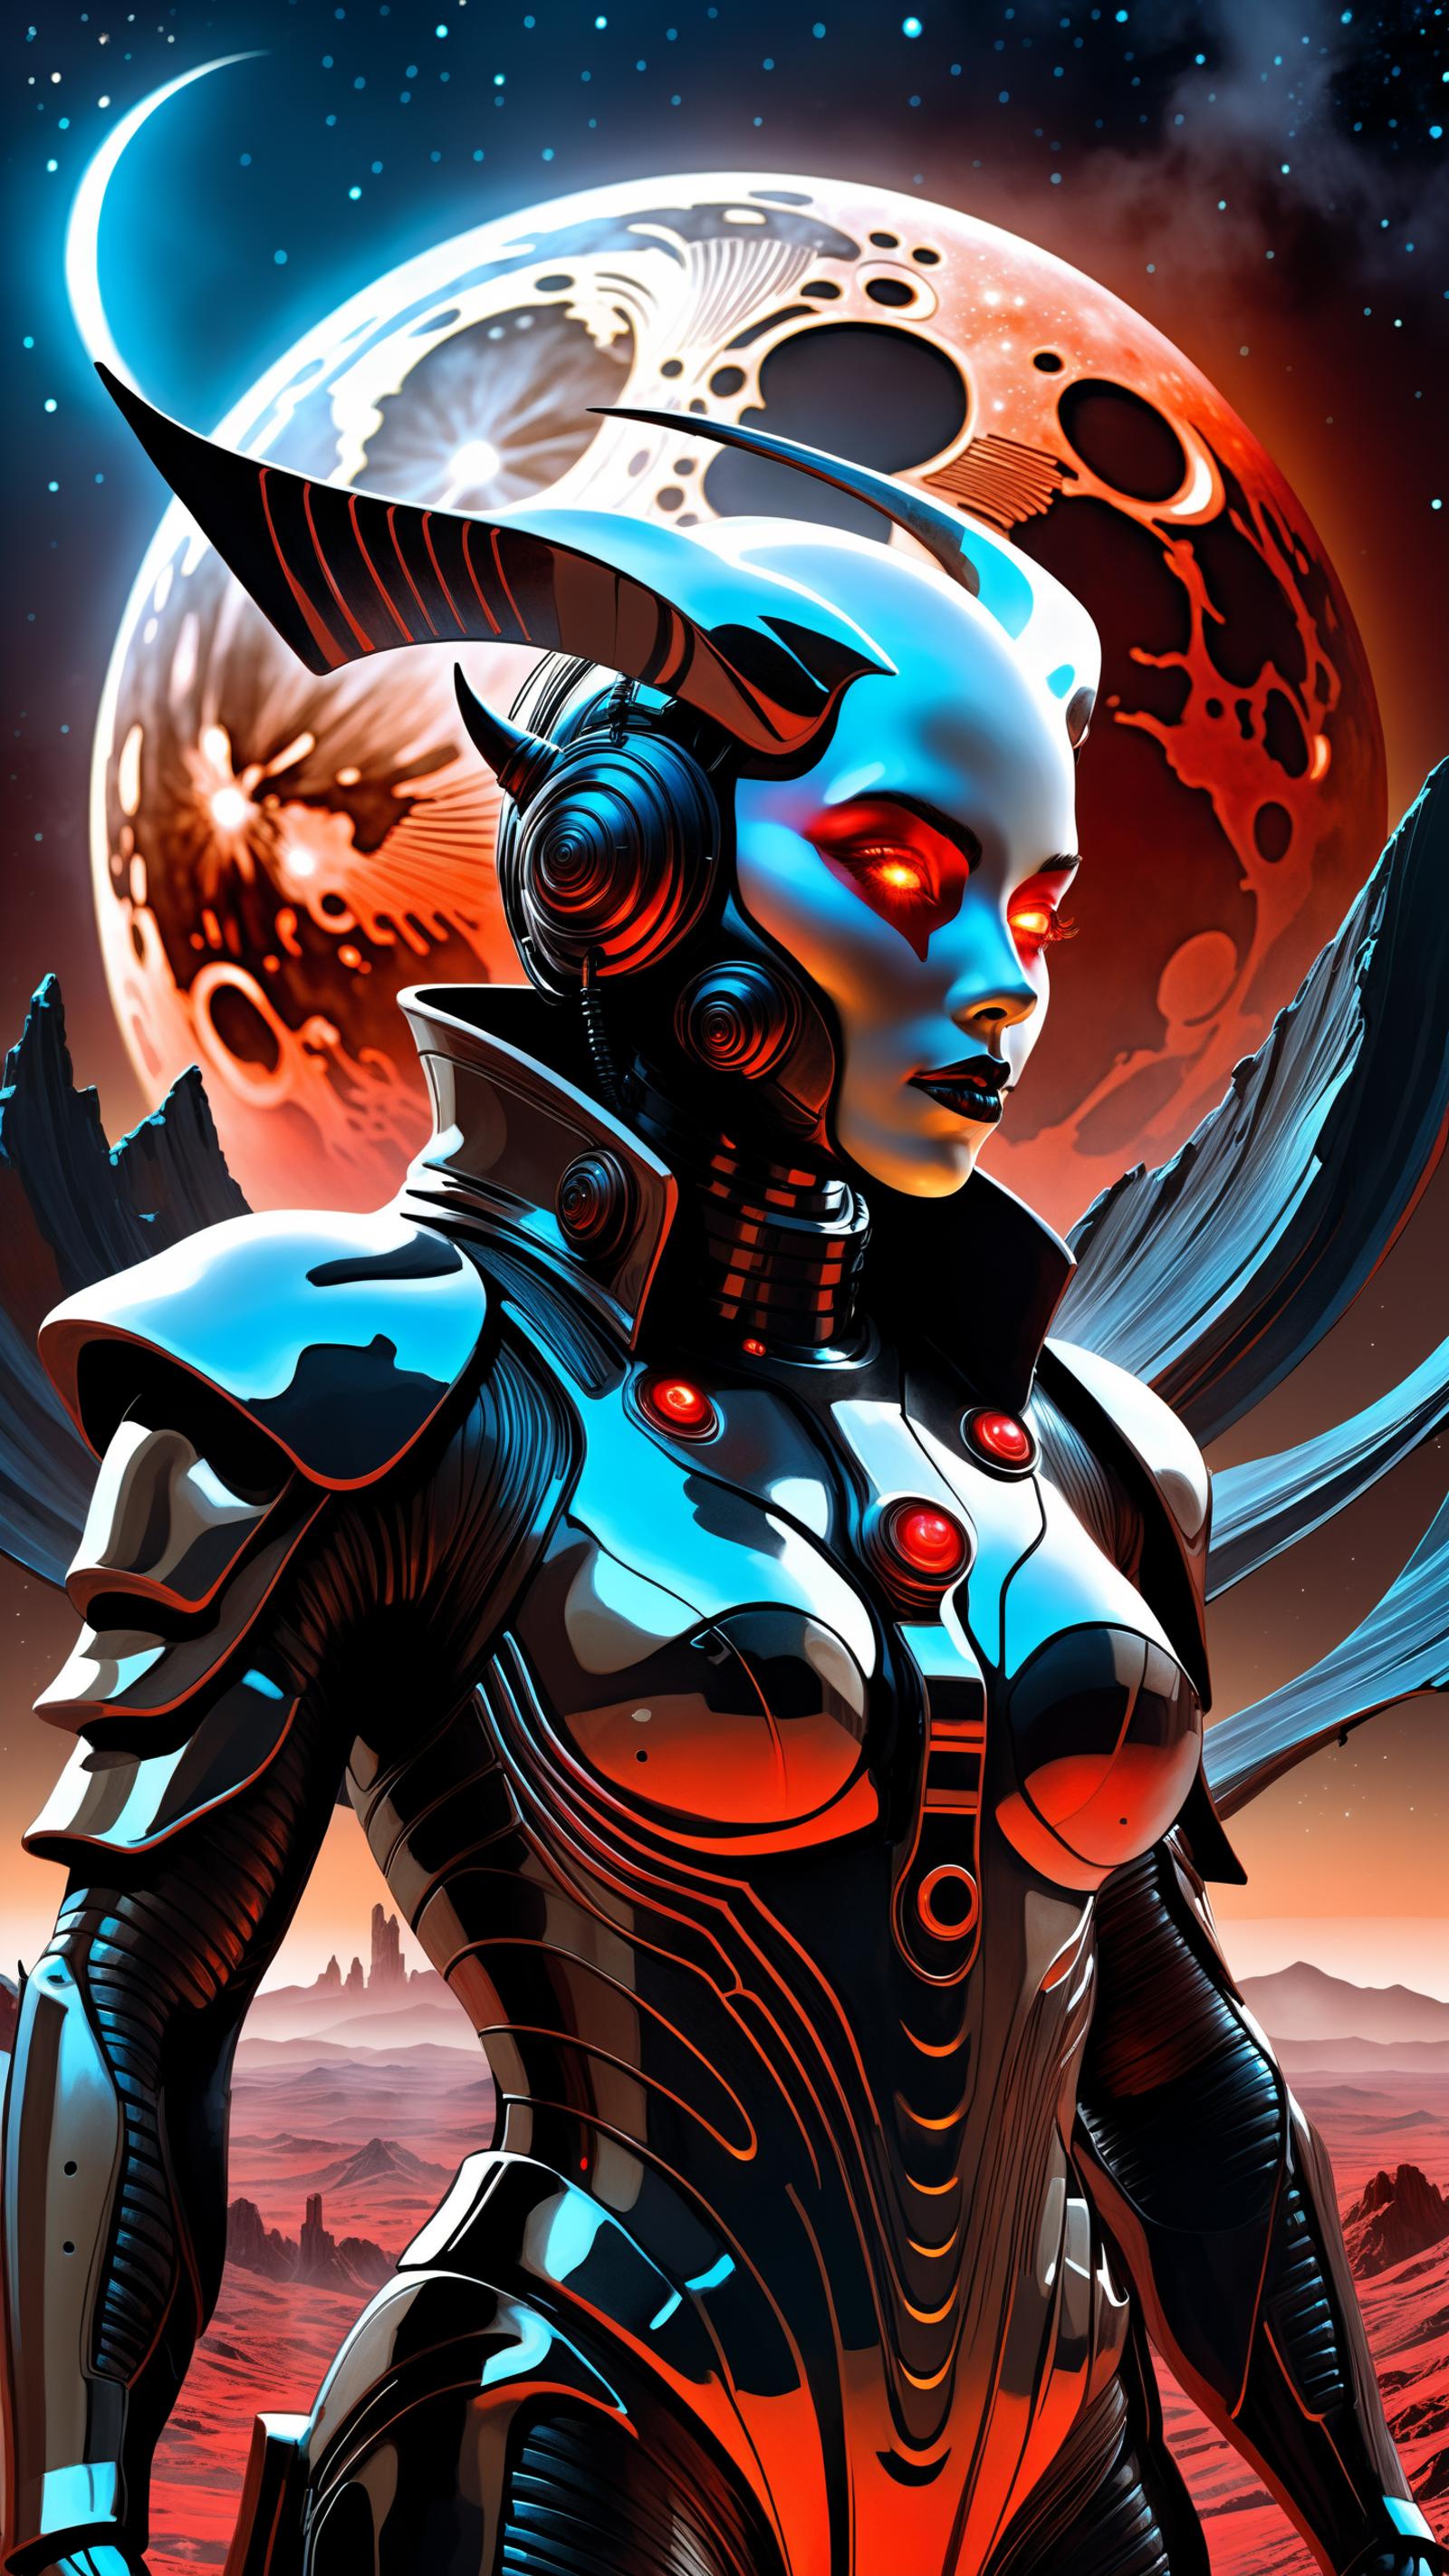 Futuristic Cyborg Woman with Glowing Eyes and Red Hair, Standing in Front of a Moon and Planet, with a Winged Creature on Her Shoulder.